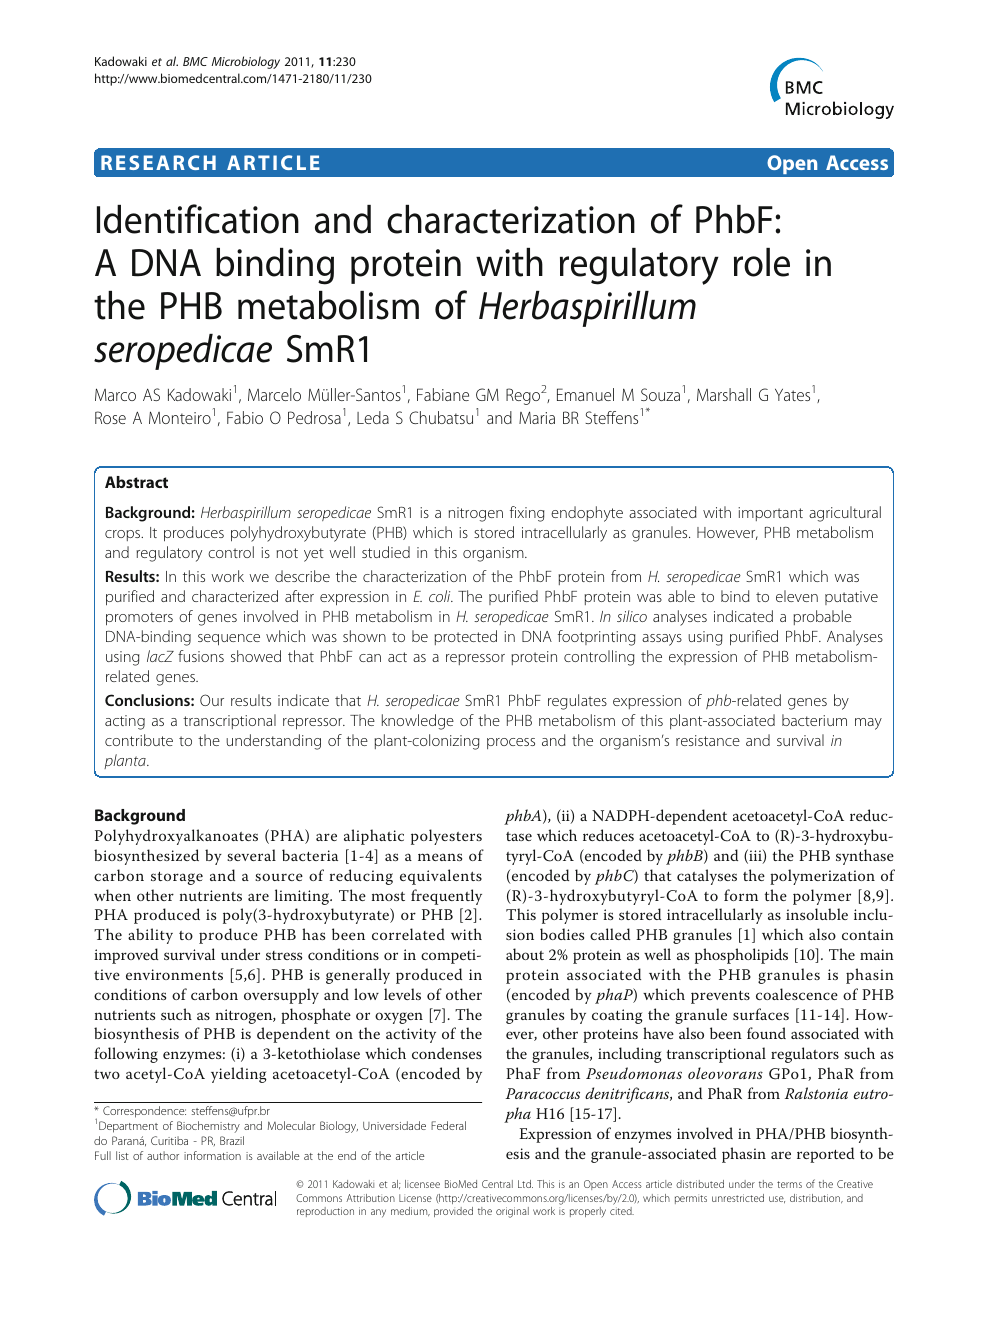 Identification And Characterization Of Phbf A Dna Binding Protein With Regulatory Role In The Phb Metabolism Of Herbaspirillum Seropedicae Smr1 Topic Of Research Paper In Biological Sciences Download Scholarly Article Pdf